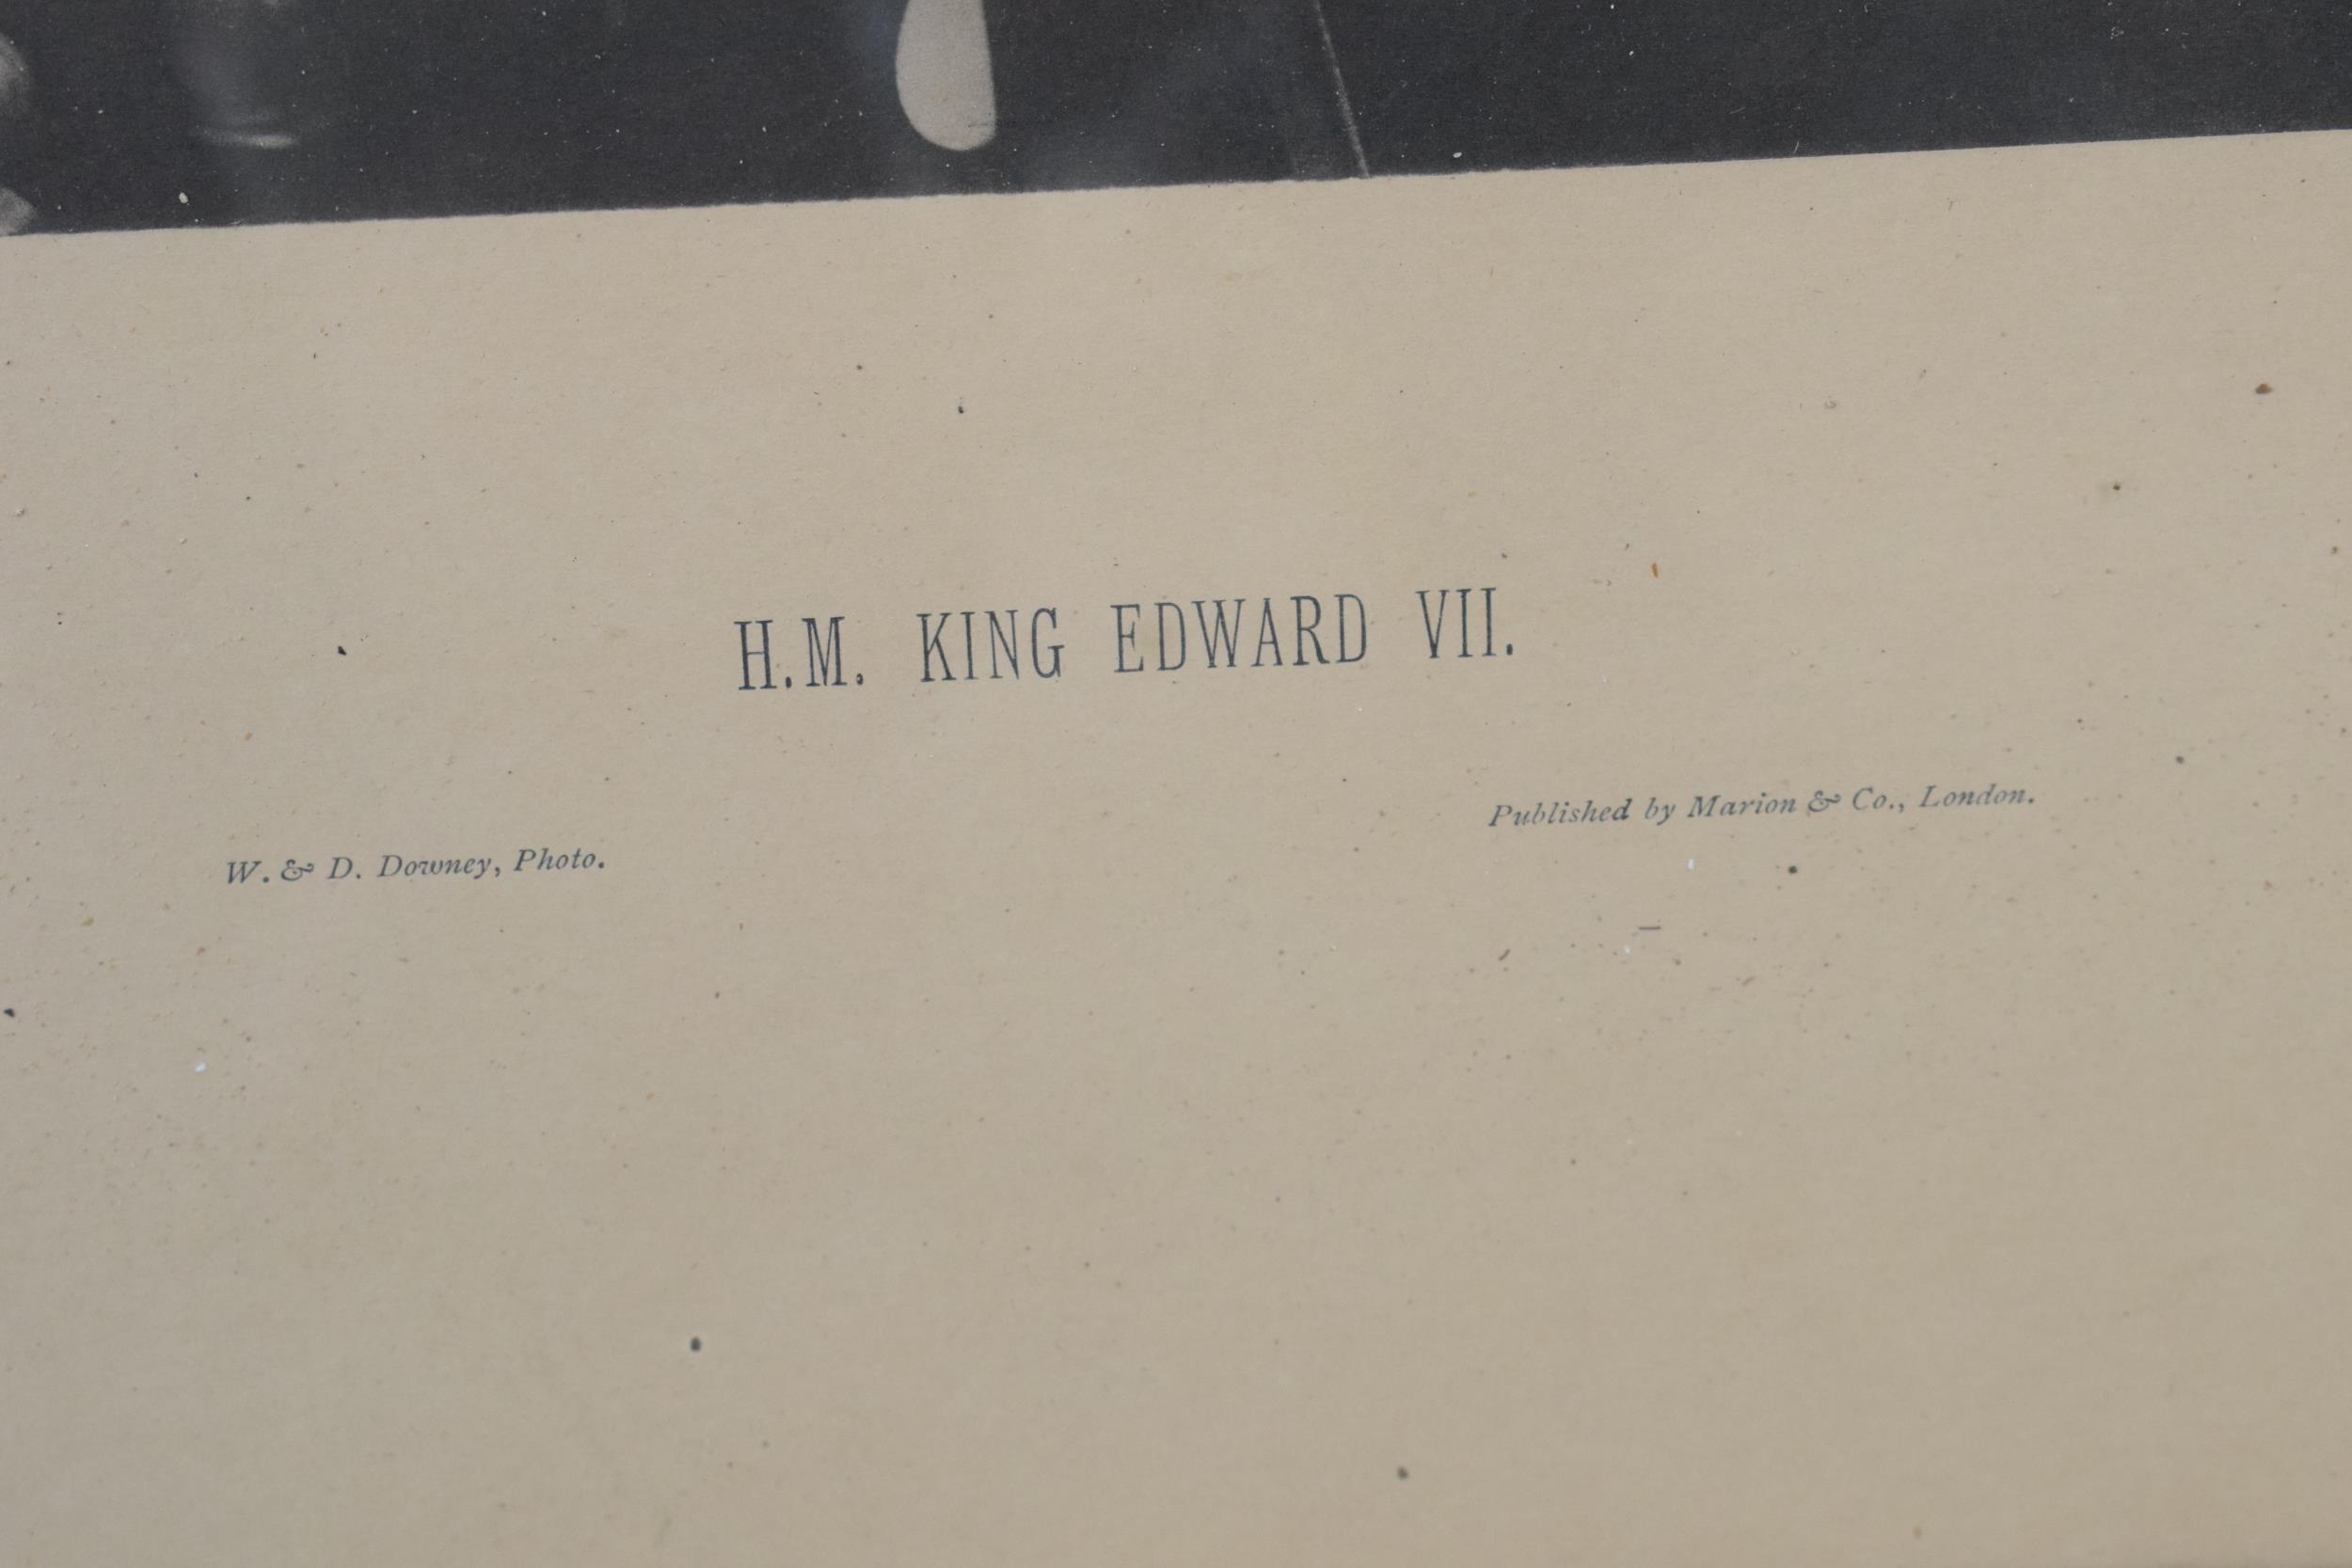 A framed photo of 'H M King Edward VII' by W & D Downey, published by Marion and Co, London. 64 x - Image 4 of 4